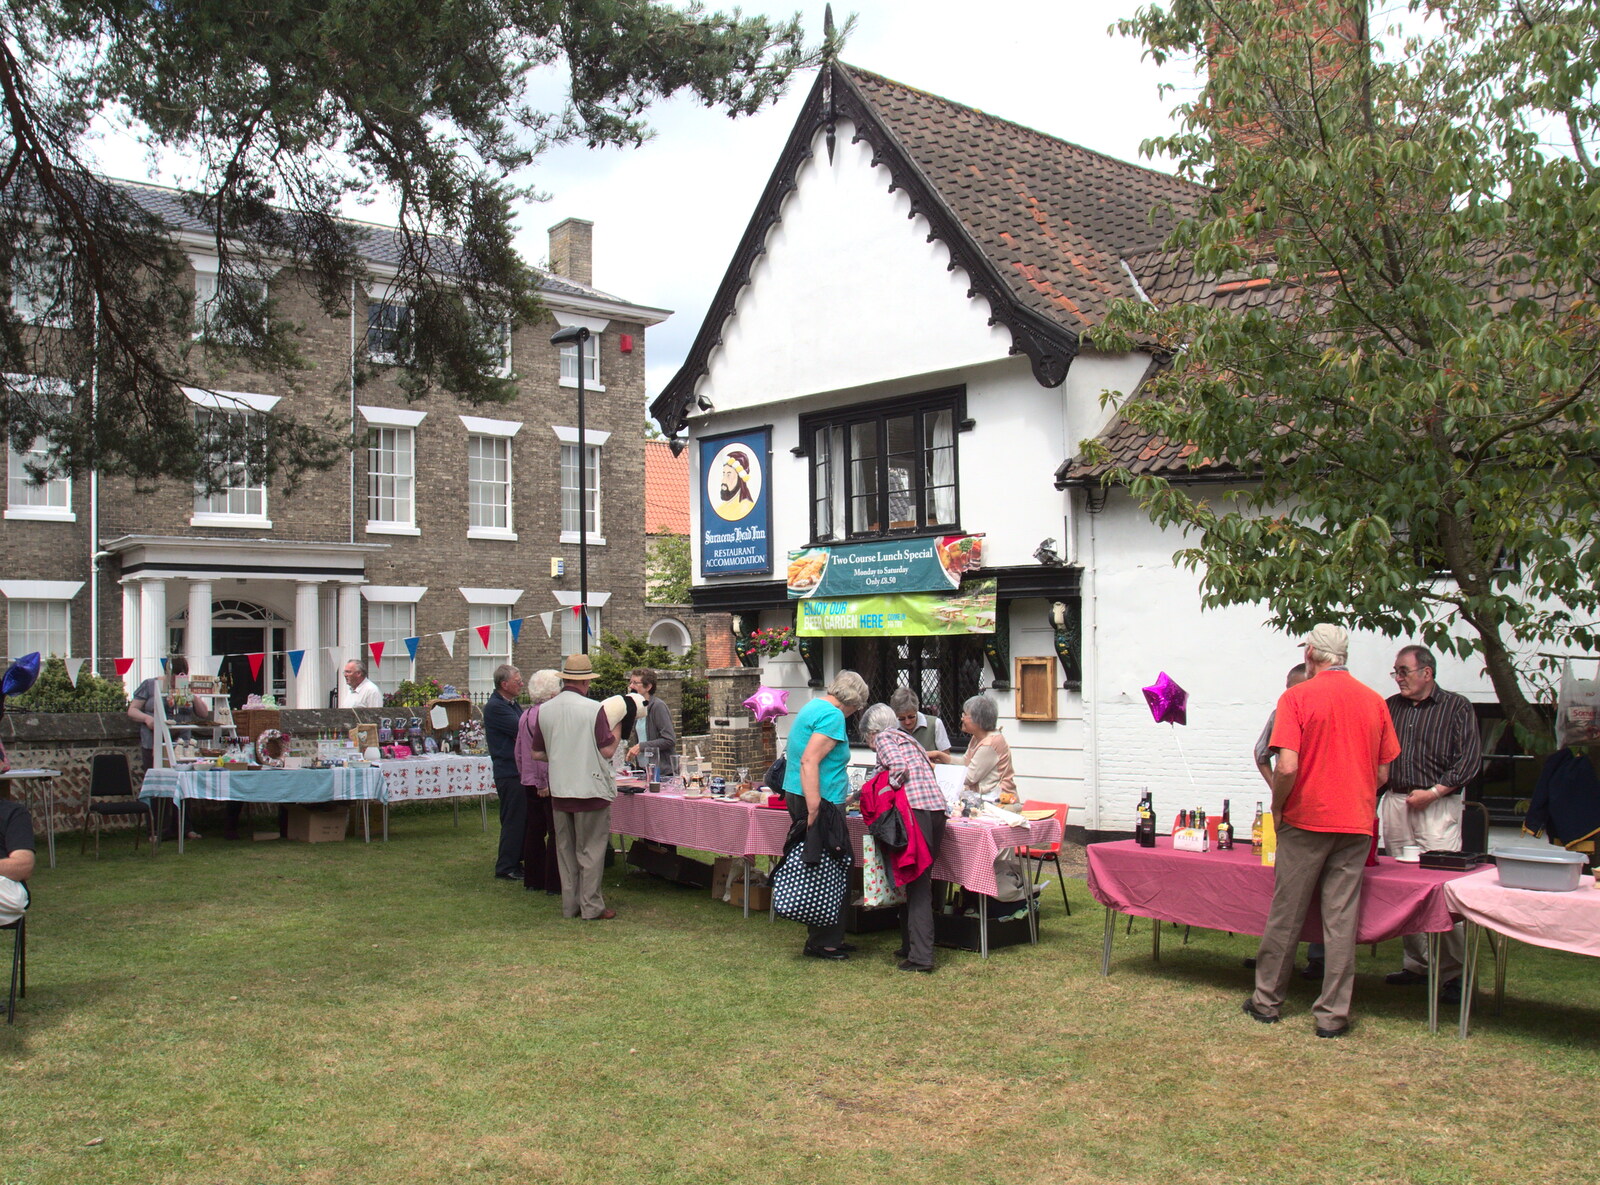 The Saracen's Head from the church hall from A Busy Day and a Church Fair, Diss, Norfolk - 28th June 2014